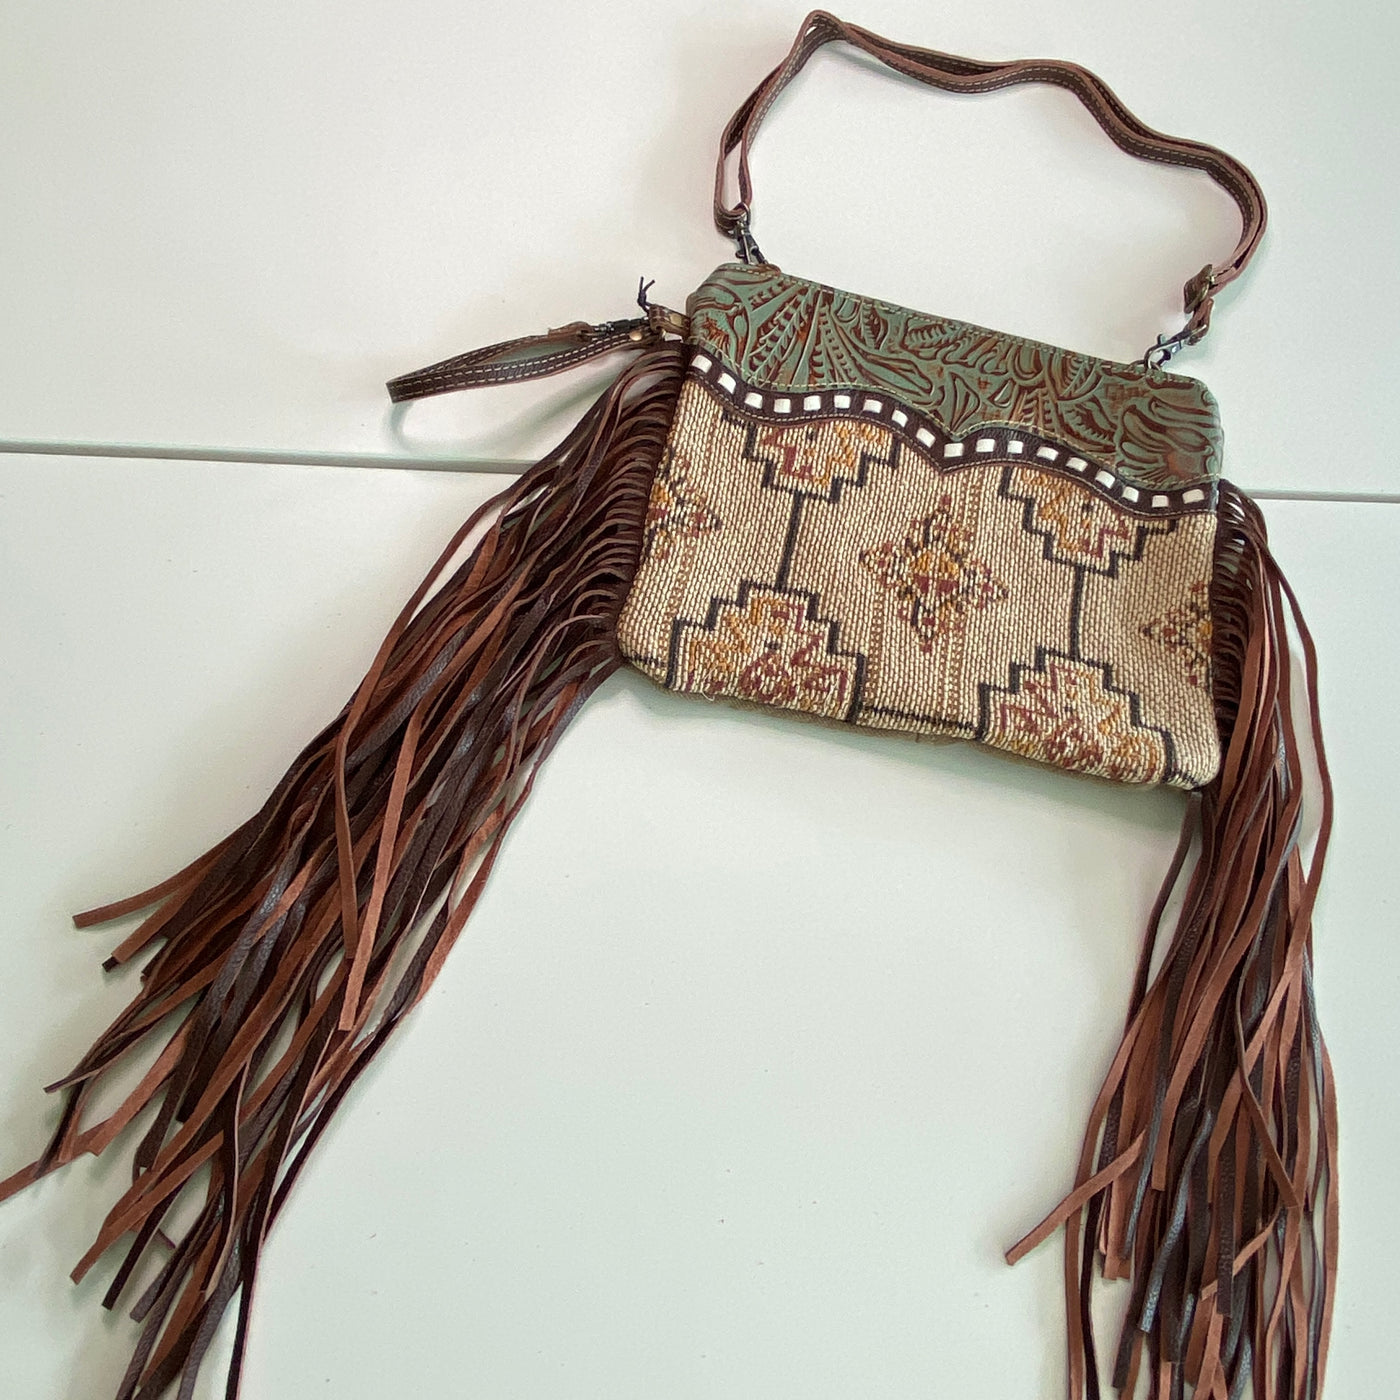 The CrossBody Collection by Myra Bags